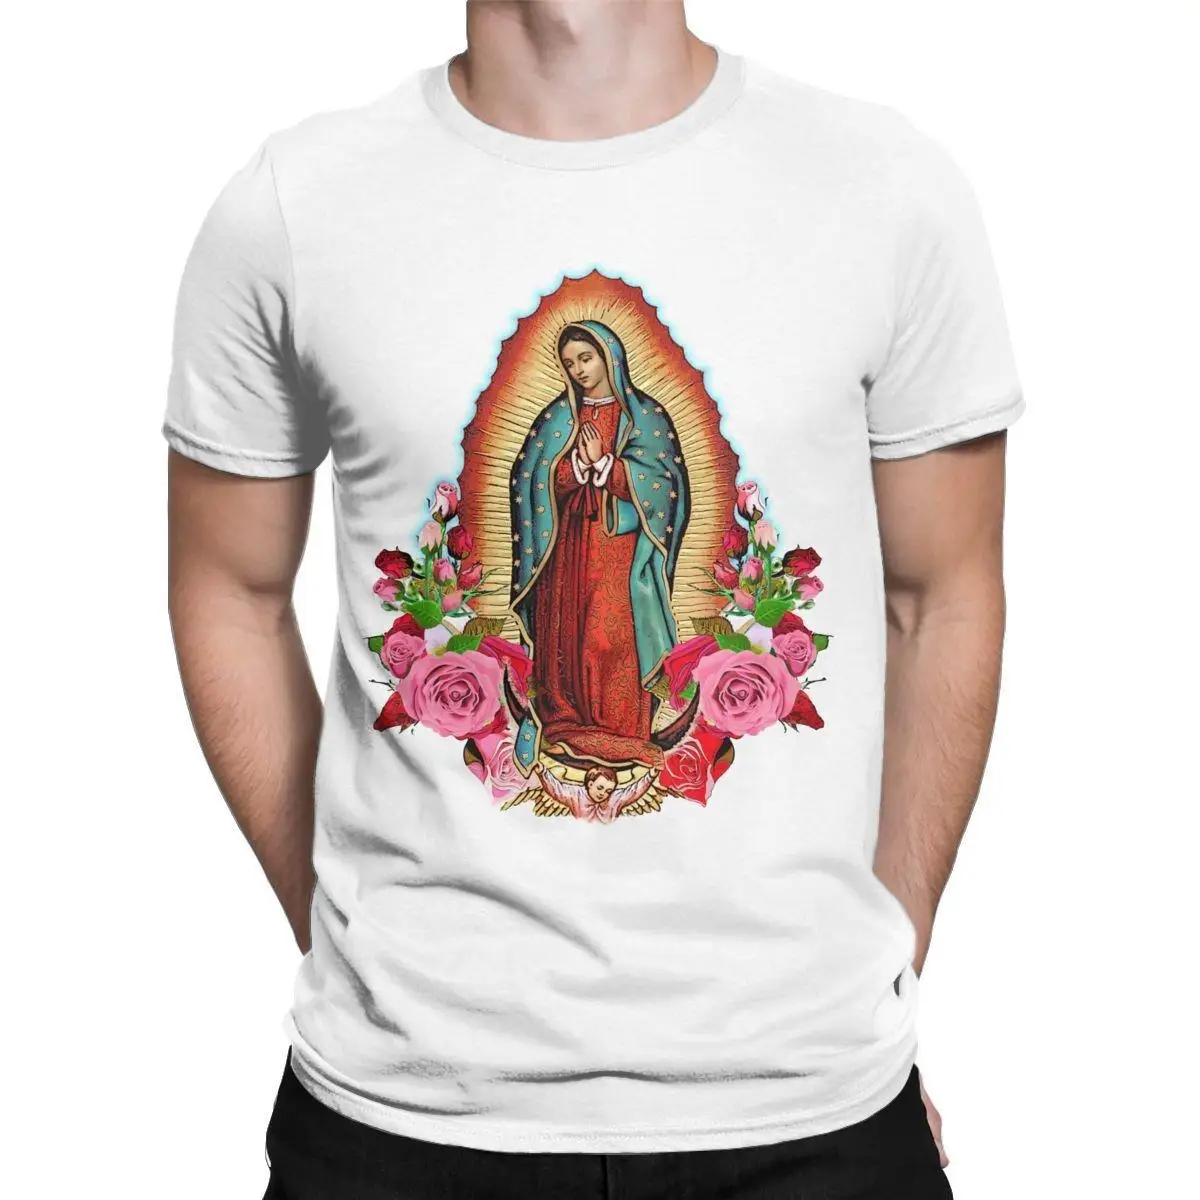 

Crazy Our Lady Of Guadalupe T-Shirts for Men Crewneck Pure Cotton T Shirts Virgin Mary Catholic Short Sleeve Tee Shirt Clothes